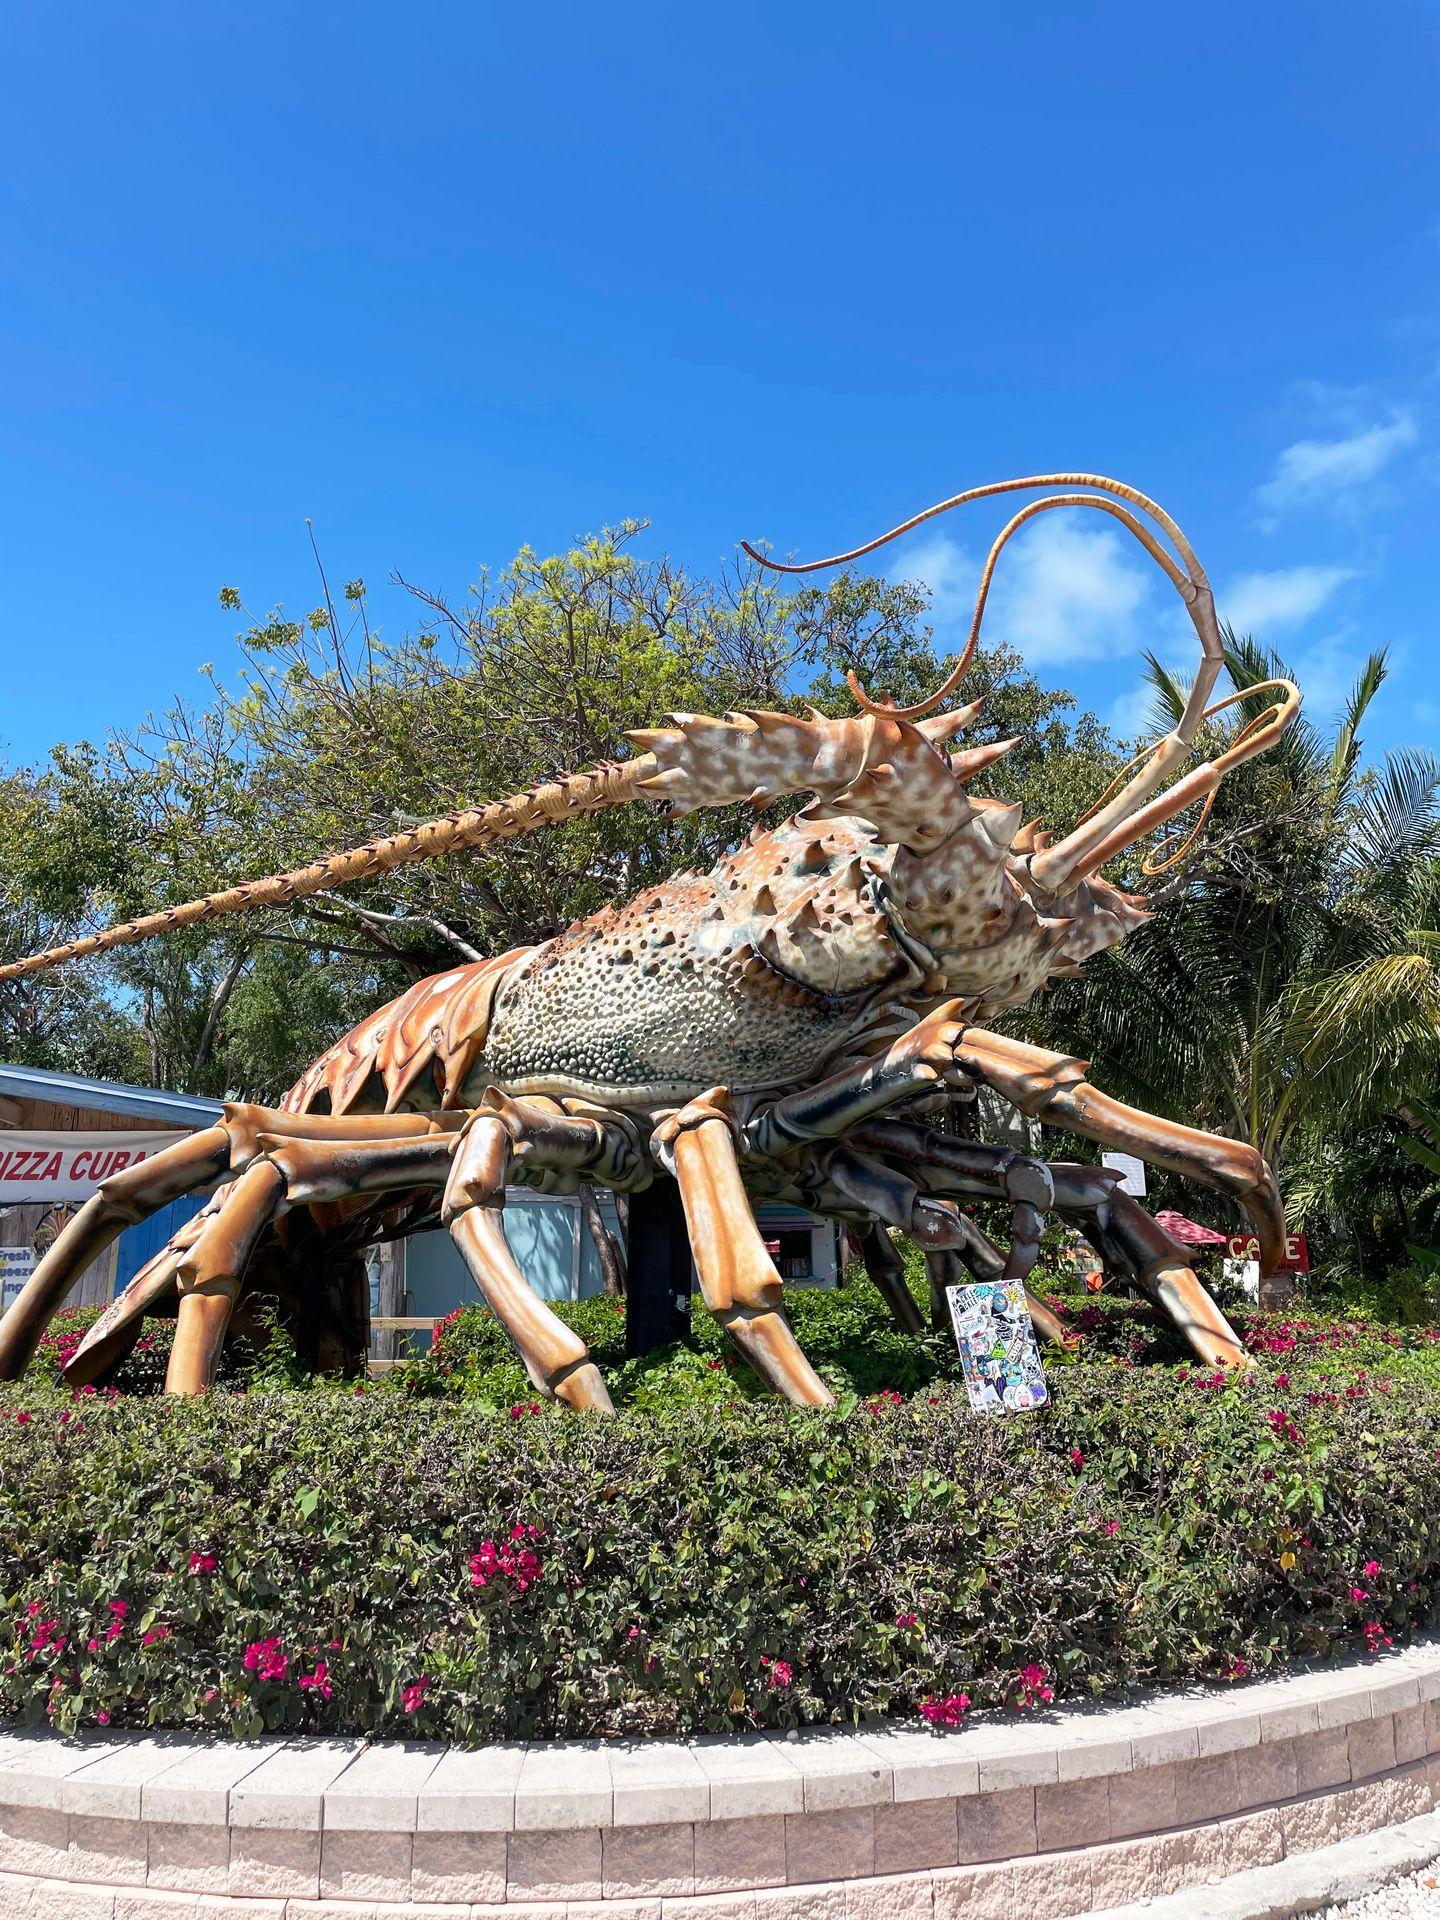 A giant lobster statue. In the foreground there is a bush with a few magenta flowers